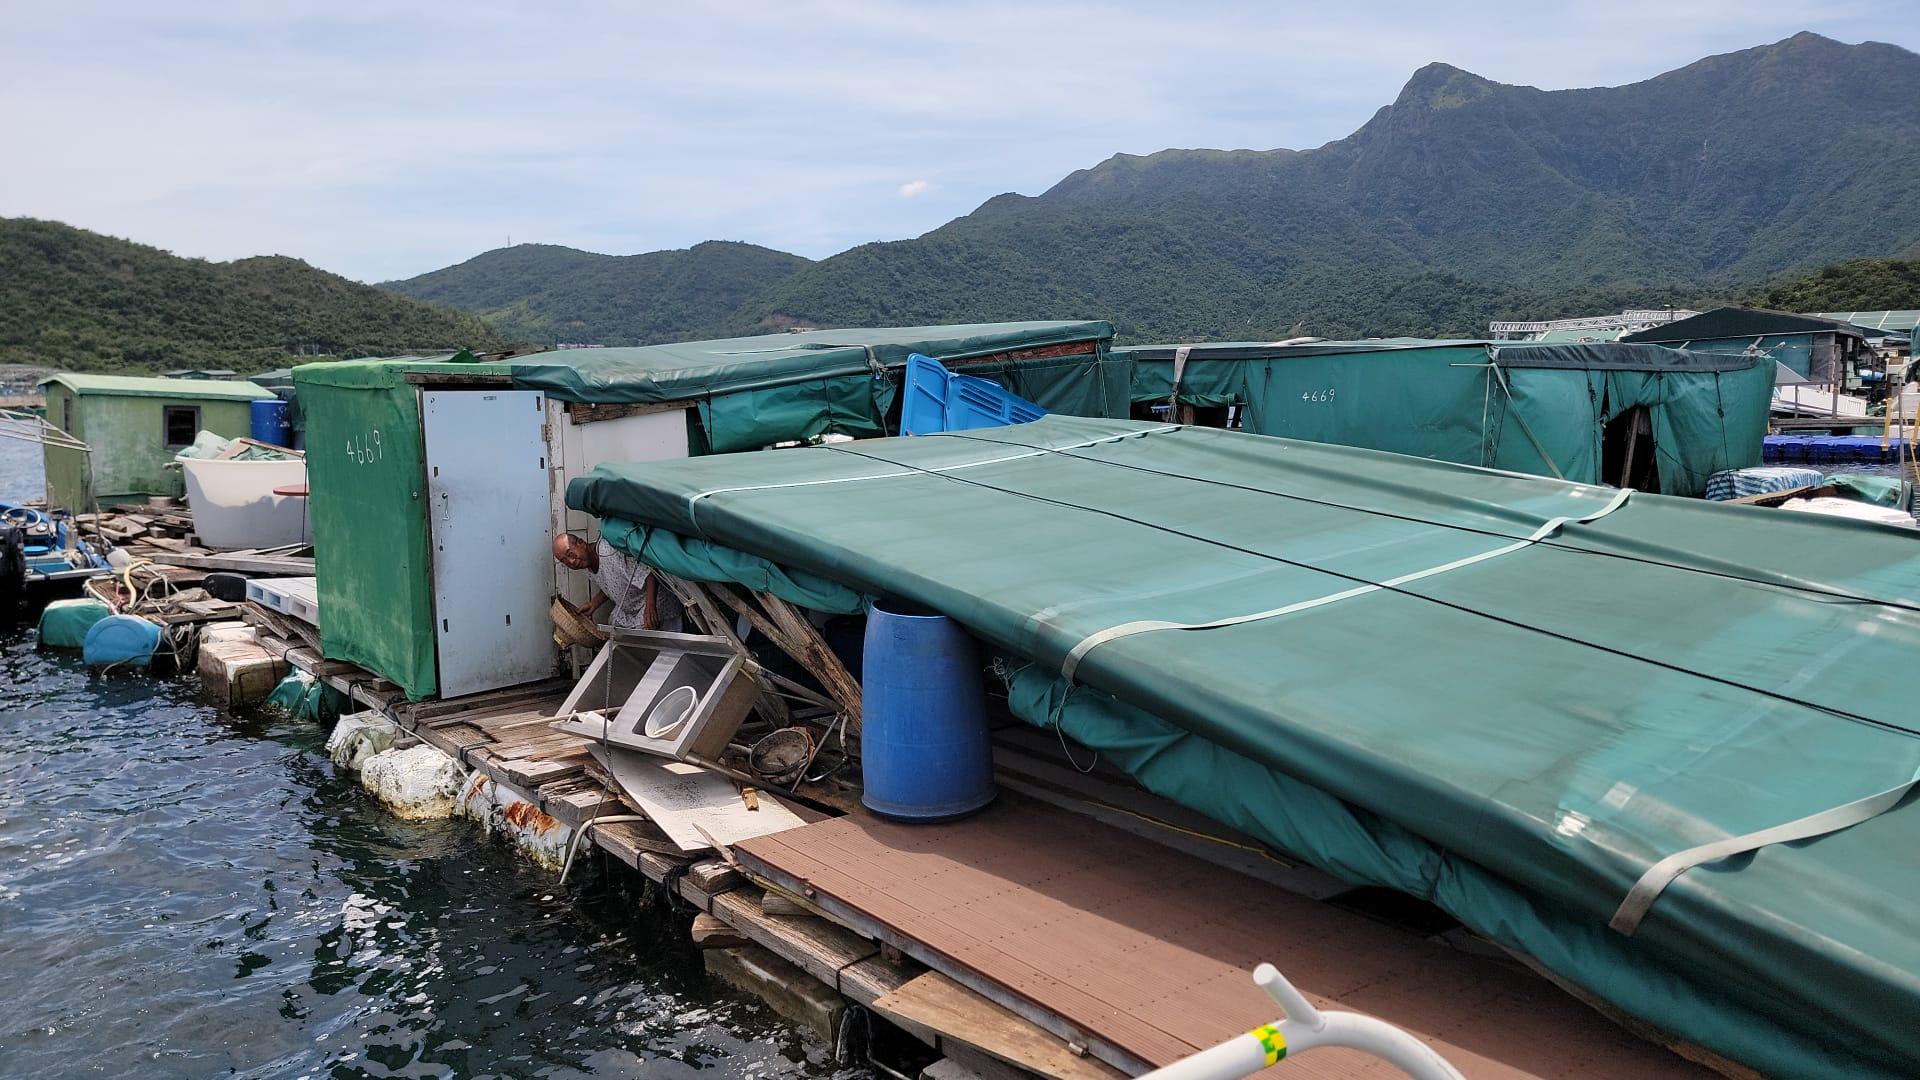 Local farmers and fish farmers who suffered serious losses caused by Typhoon Saola can register with the Agriculture, Fisheries and Conservation Department from tomorrow (September 5) to September 13 for assistance from an emergency relief fund. Photo shows a fish raft damaged by the typhoon.